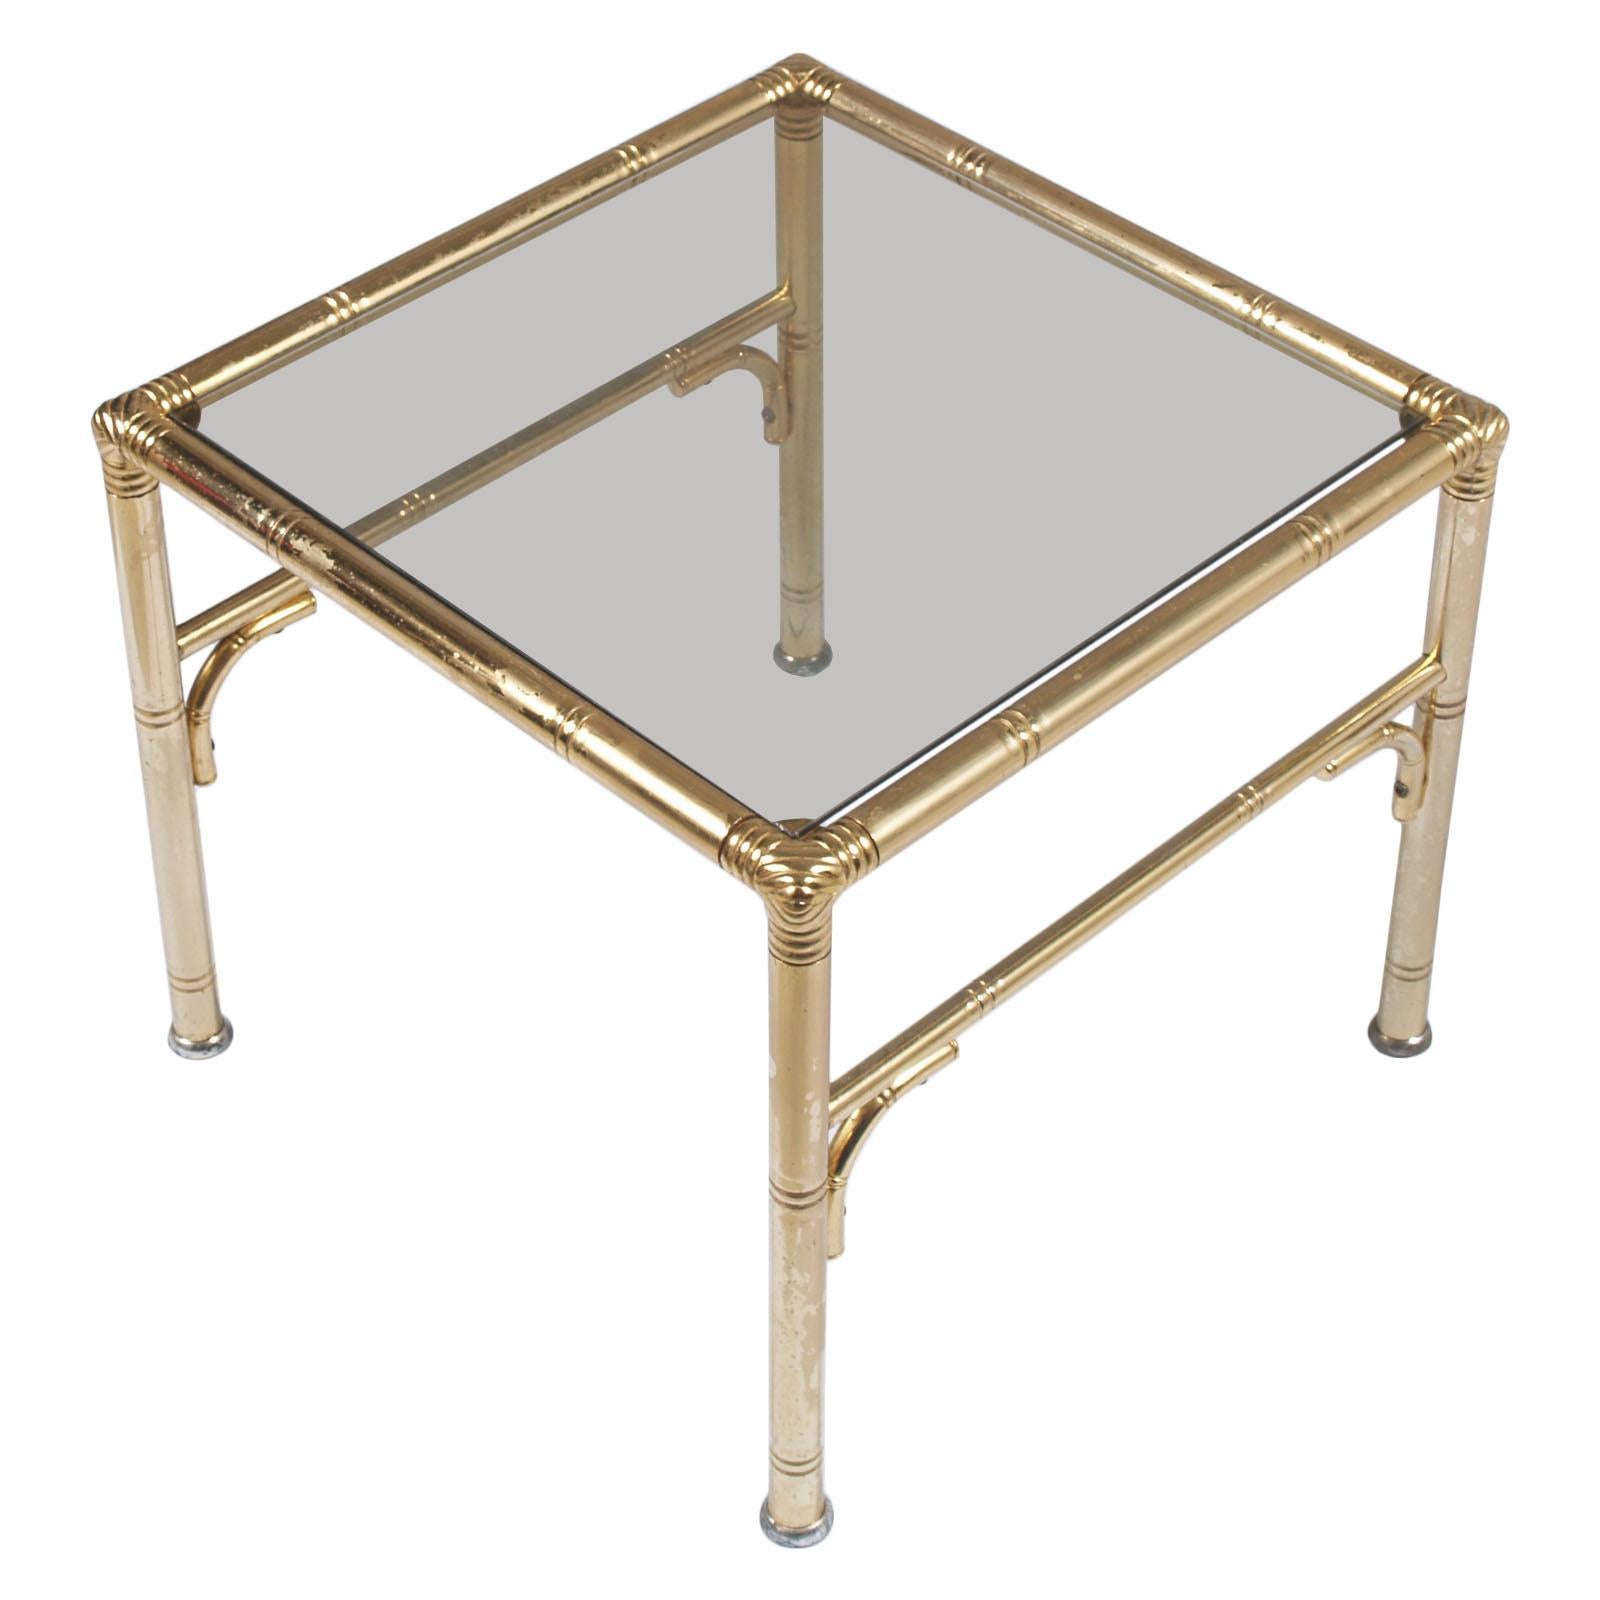 Midcentury Coffee Tables, Faux Bamboo Gilt Metal, Smoked Glass by Maison Bagues For Sale